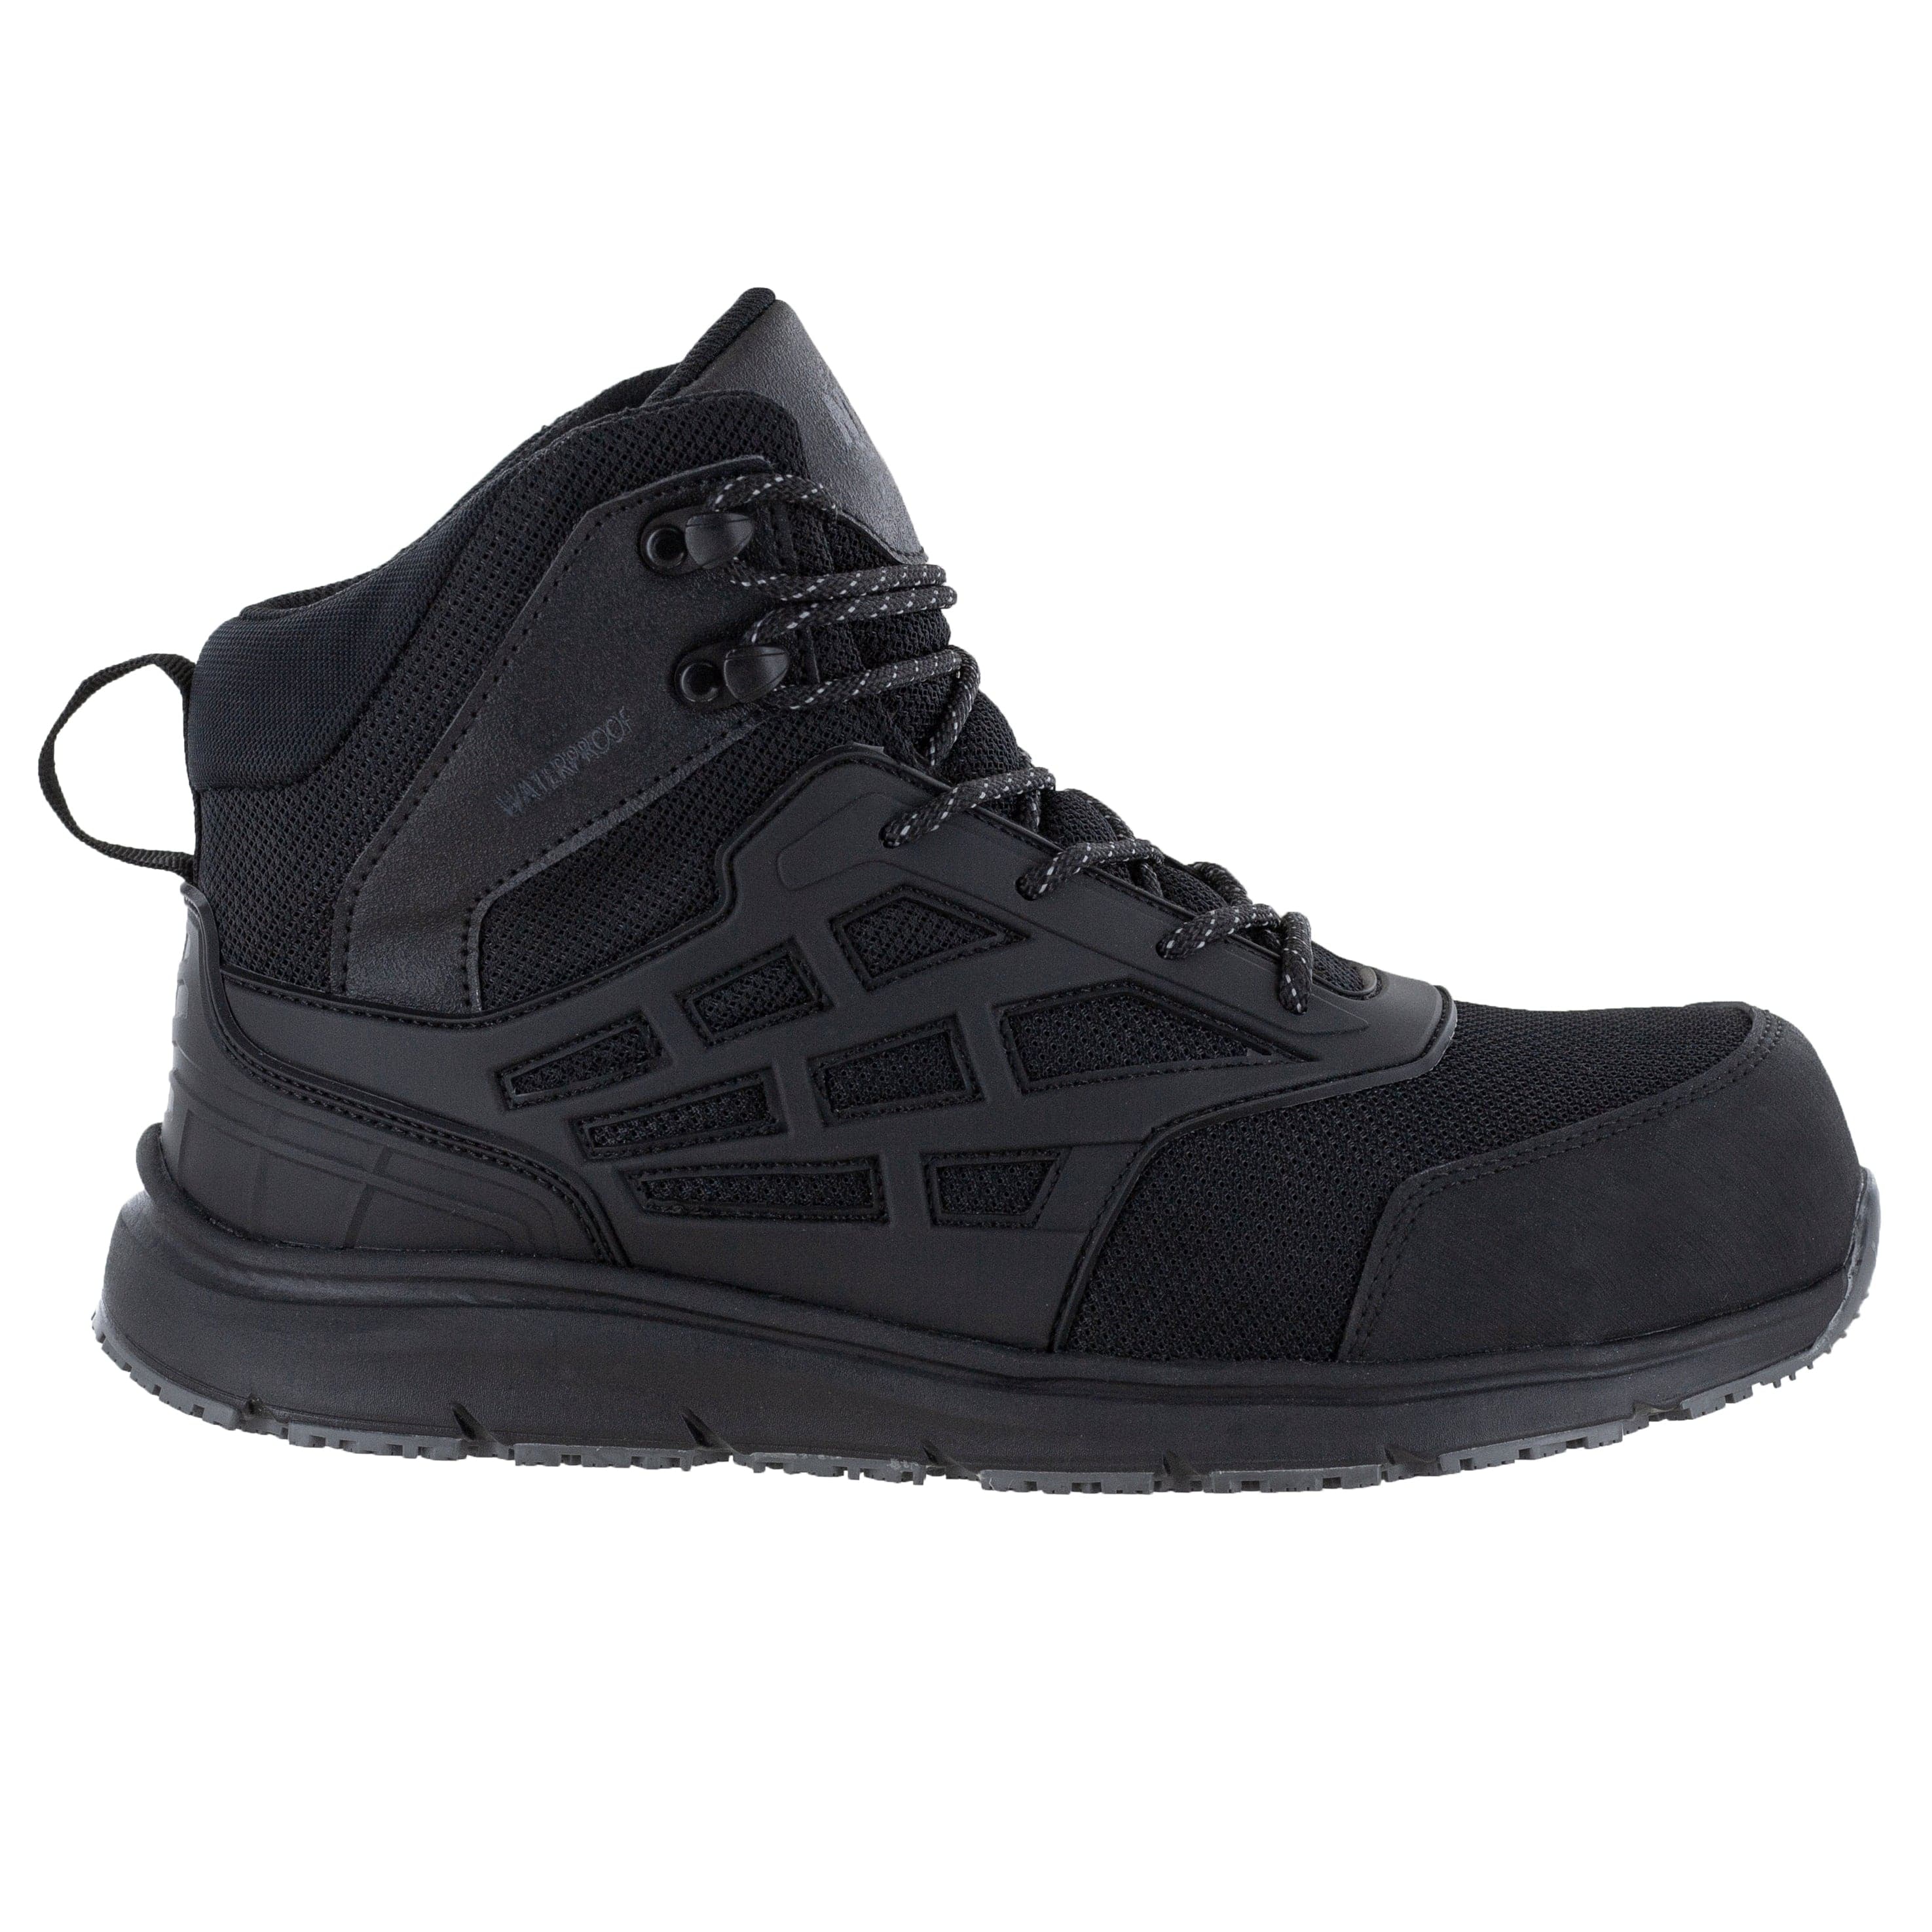 Waterproof work boots with carbon fiber toe protection for men